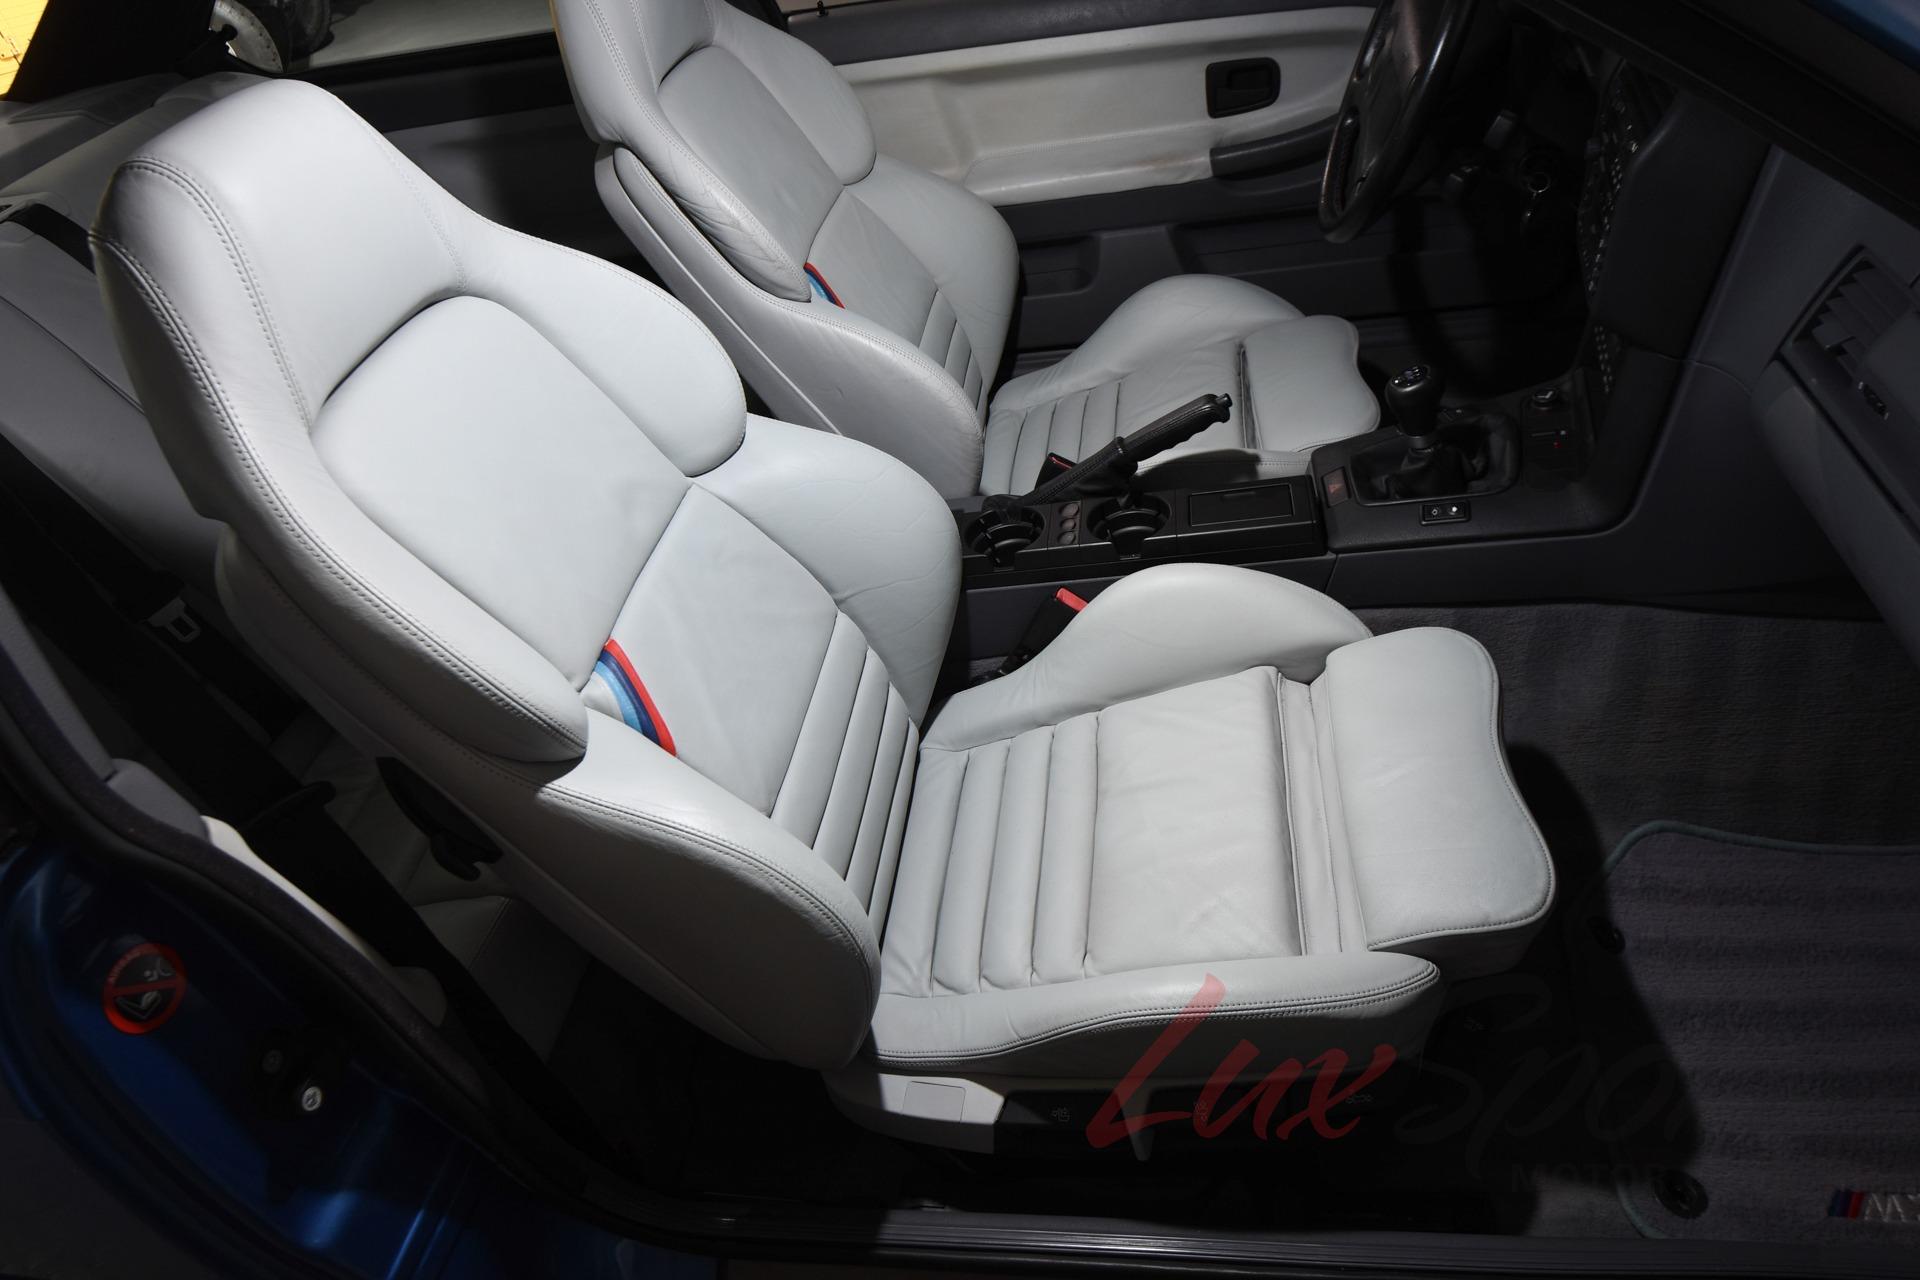 E36 M3 Seat Vader 2020